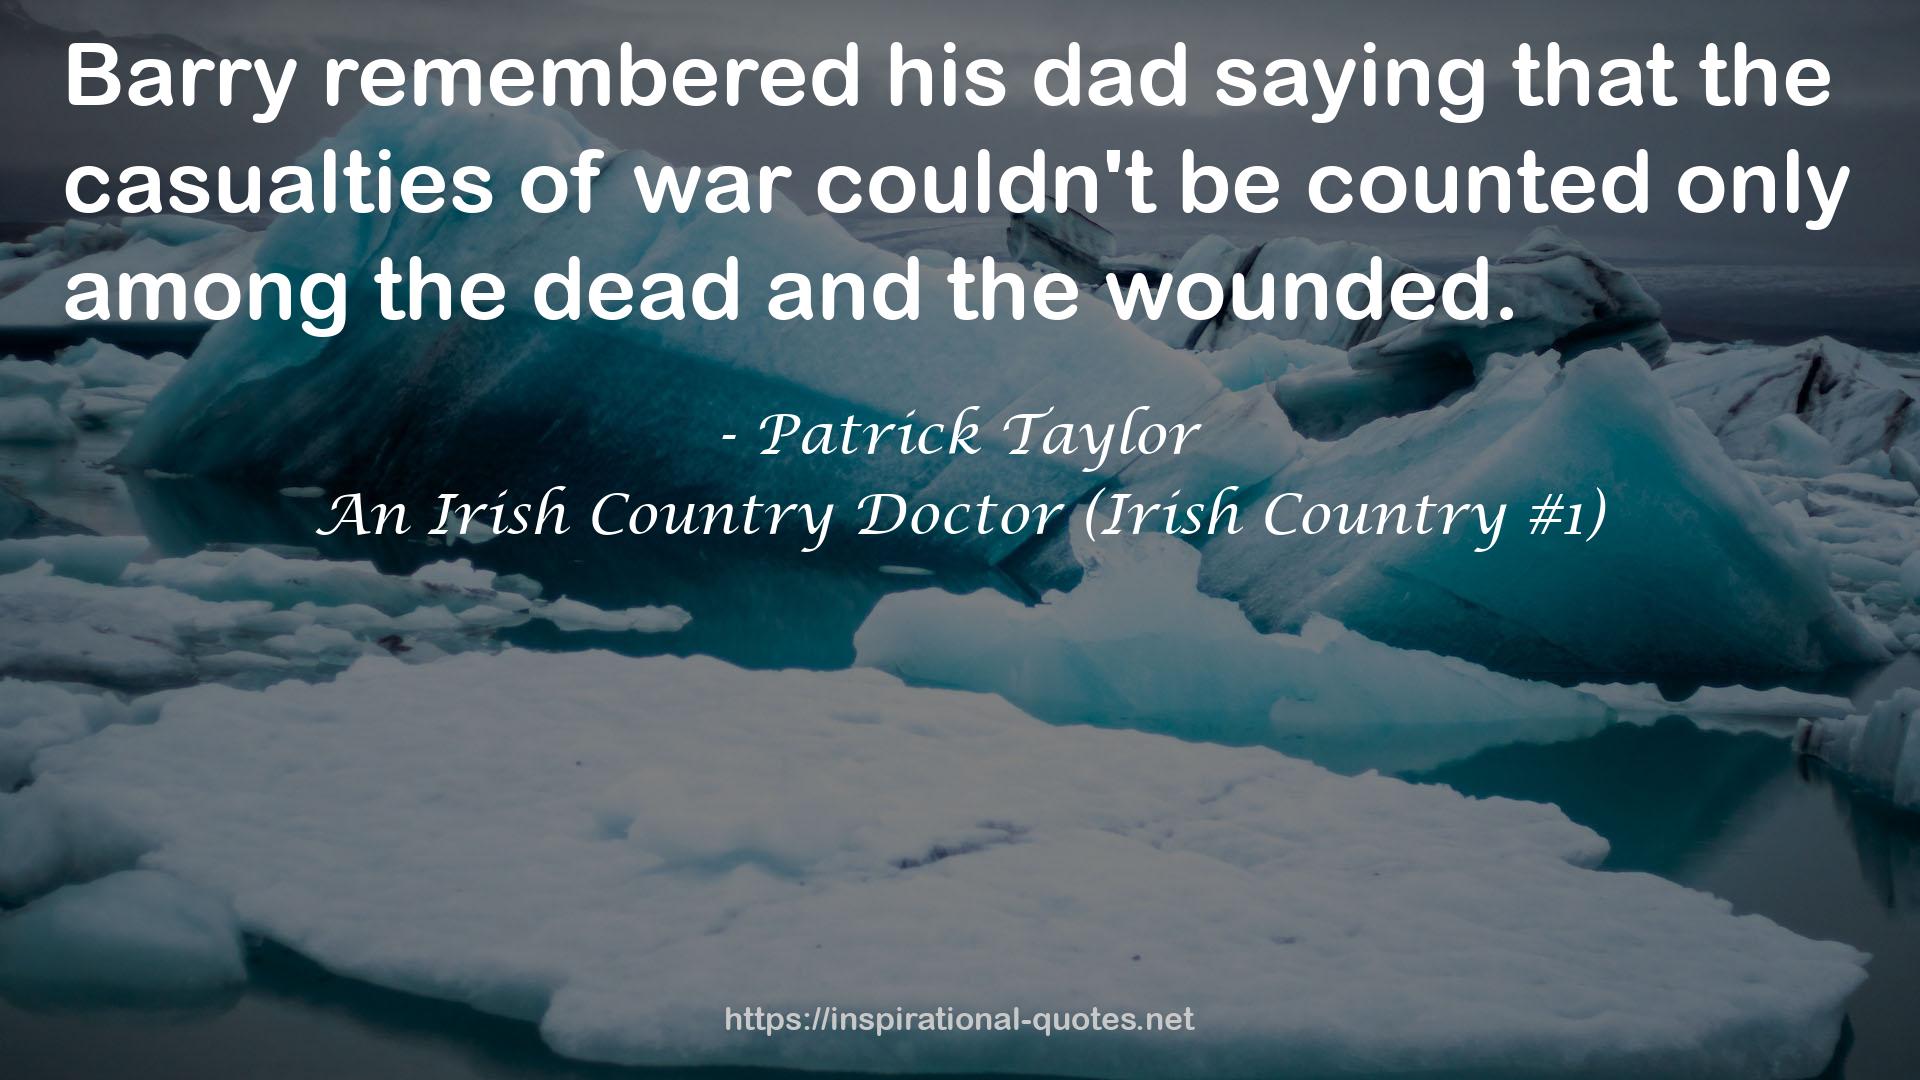 An Irish Country Doctor (Irish Country #1) QUOTES